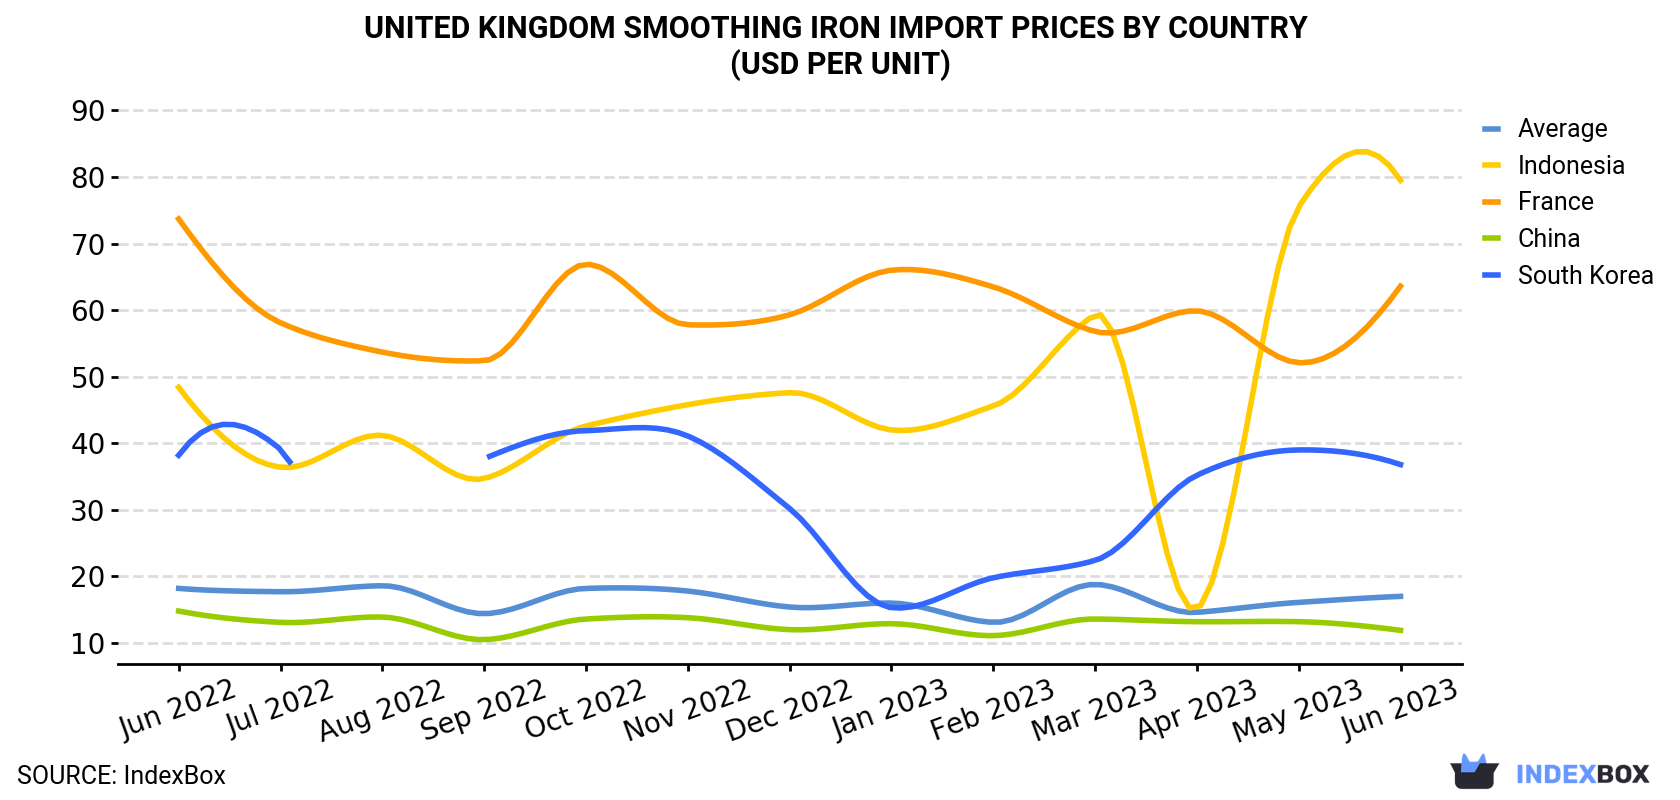 United Kingdom Smoothing Iron Import Prices By Country (USD Per Unit)